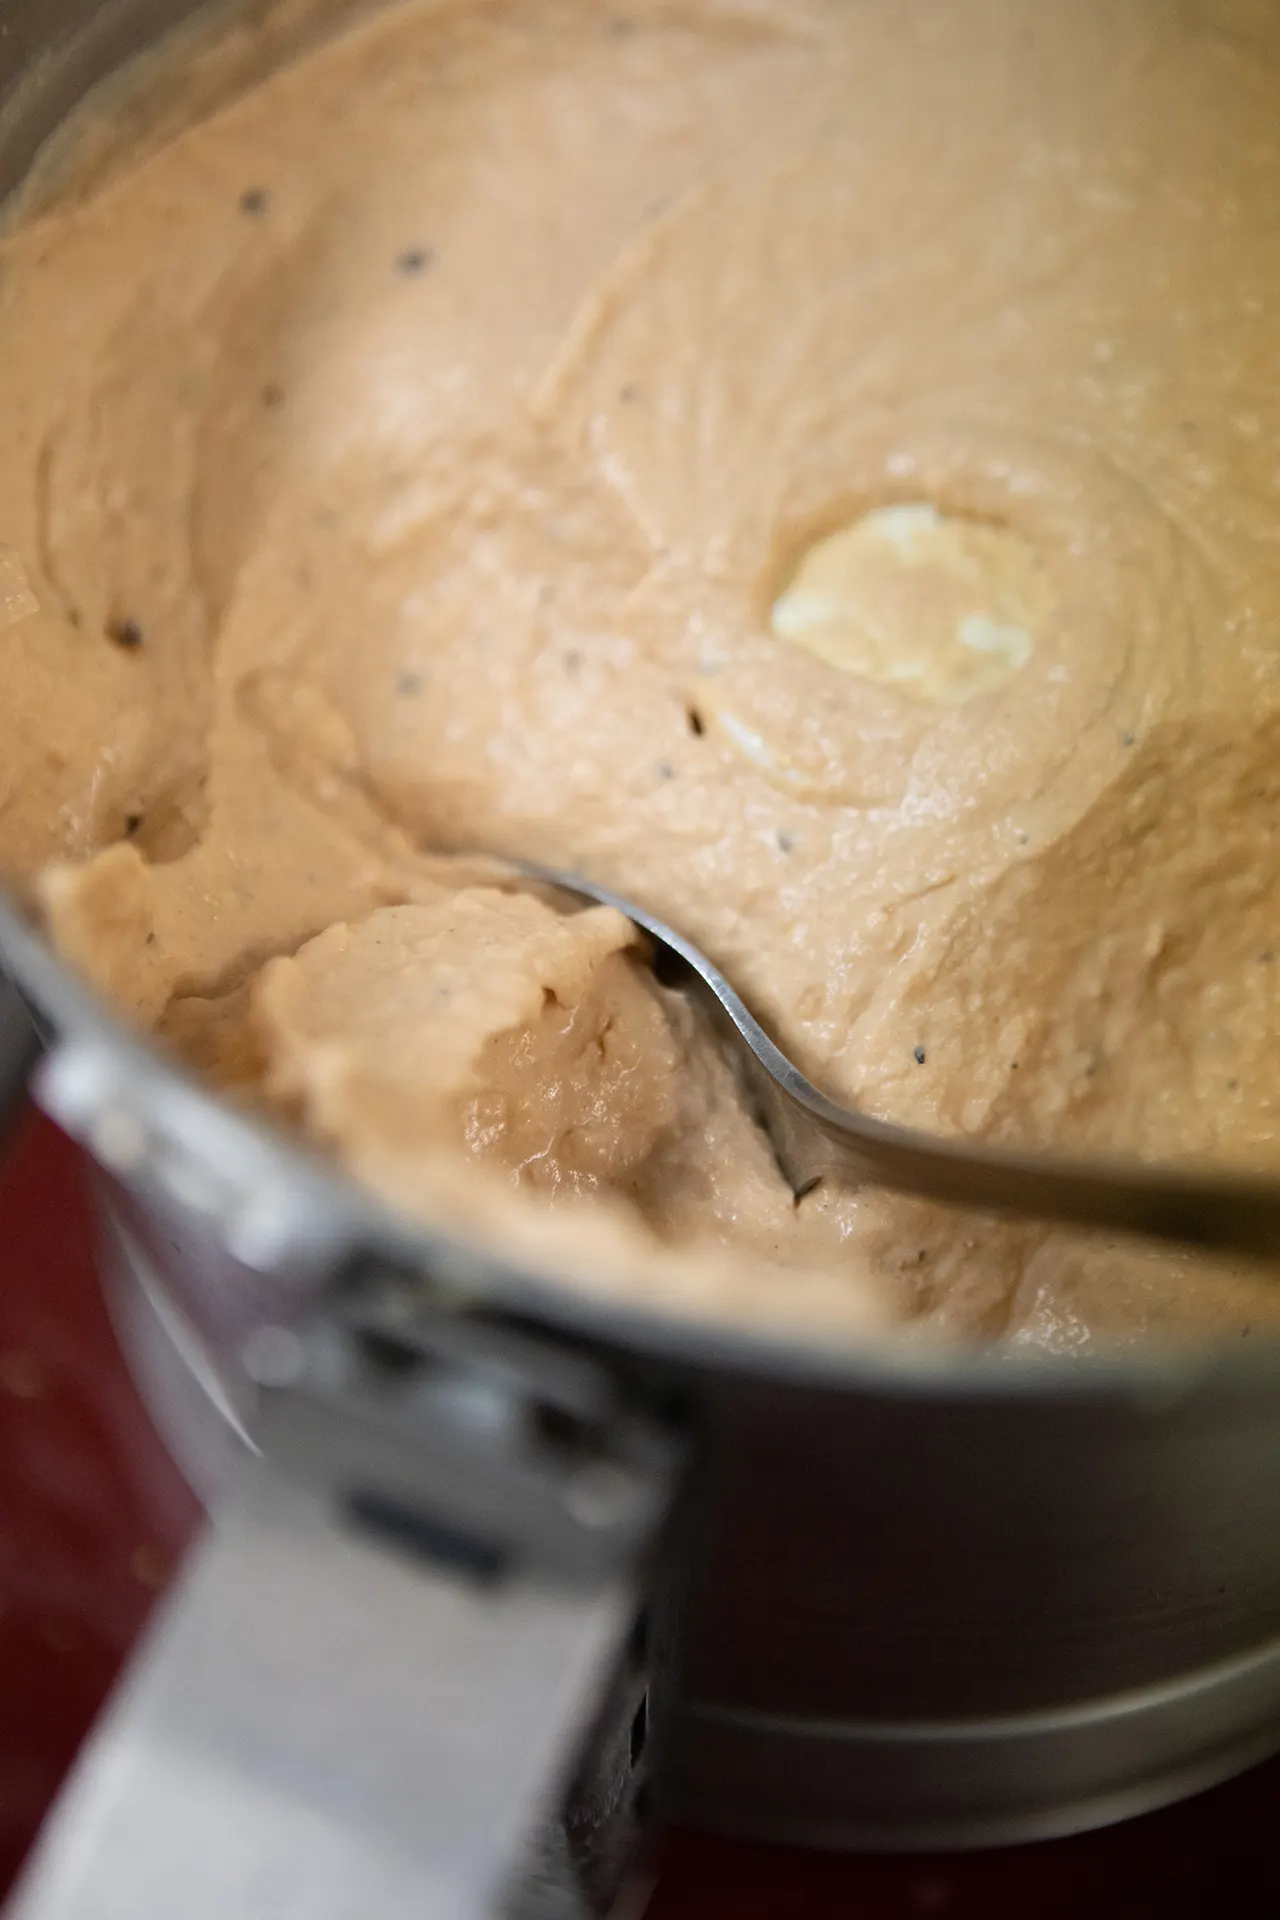 Silky smooth Roasted Tomato Habanero Hummus is presented up close in a large metallic container.